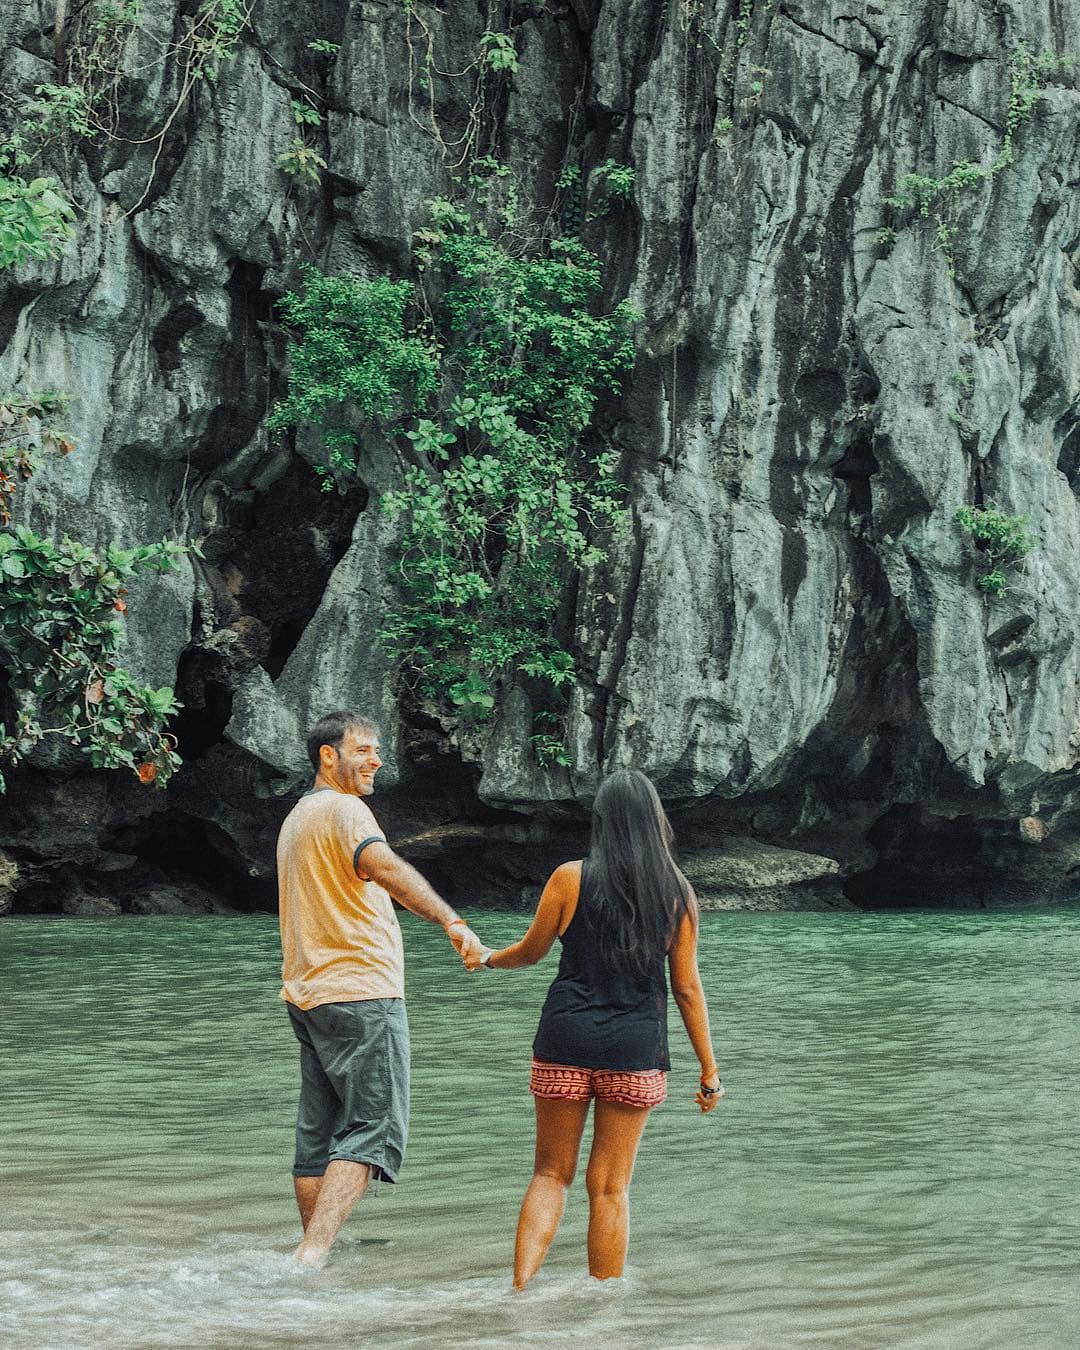 places to visit in philippines for couples, best places to visit in the philippines, tourist spots in the philippines, places to visit in the philippines for couples